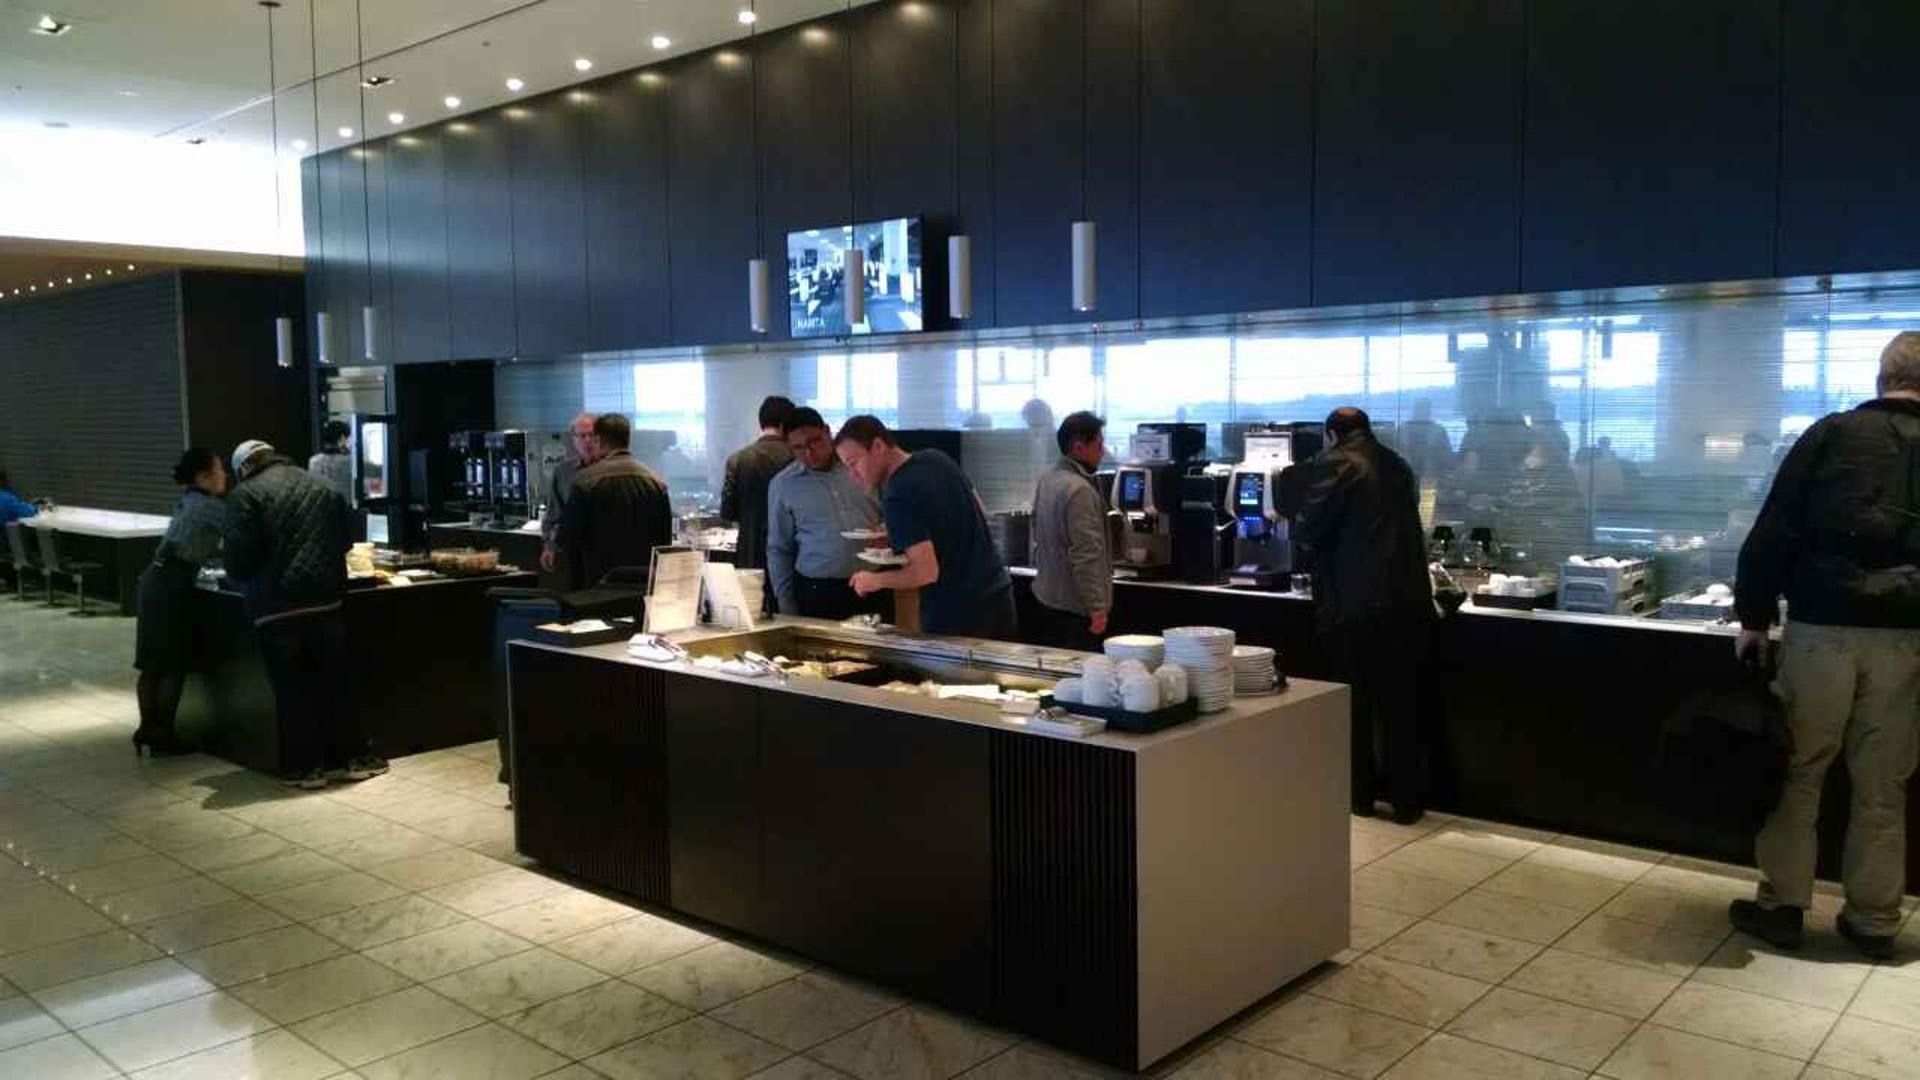 All Nippon Airways ANA Lounge image 19 of 39